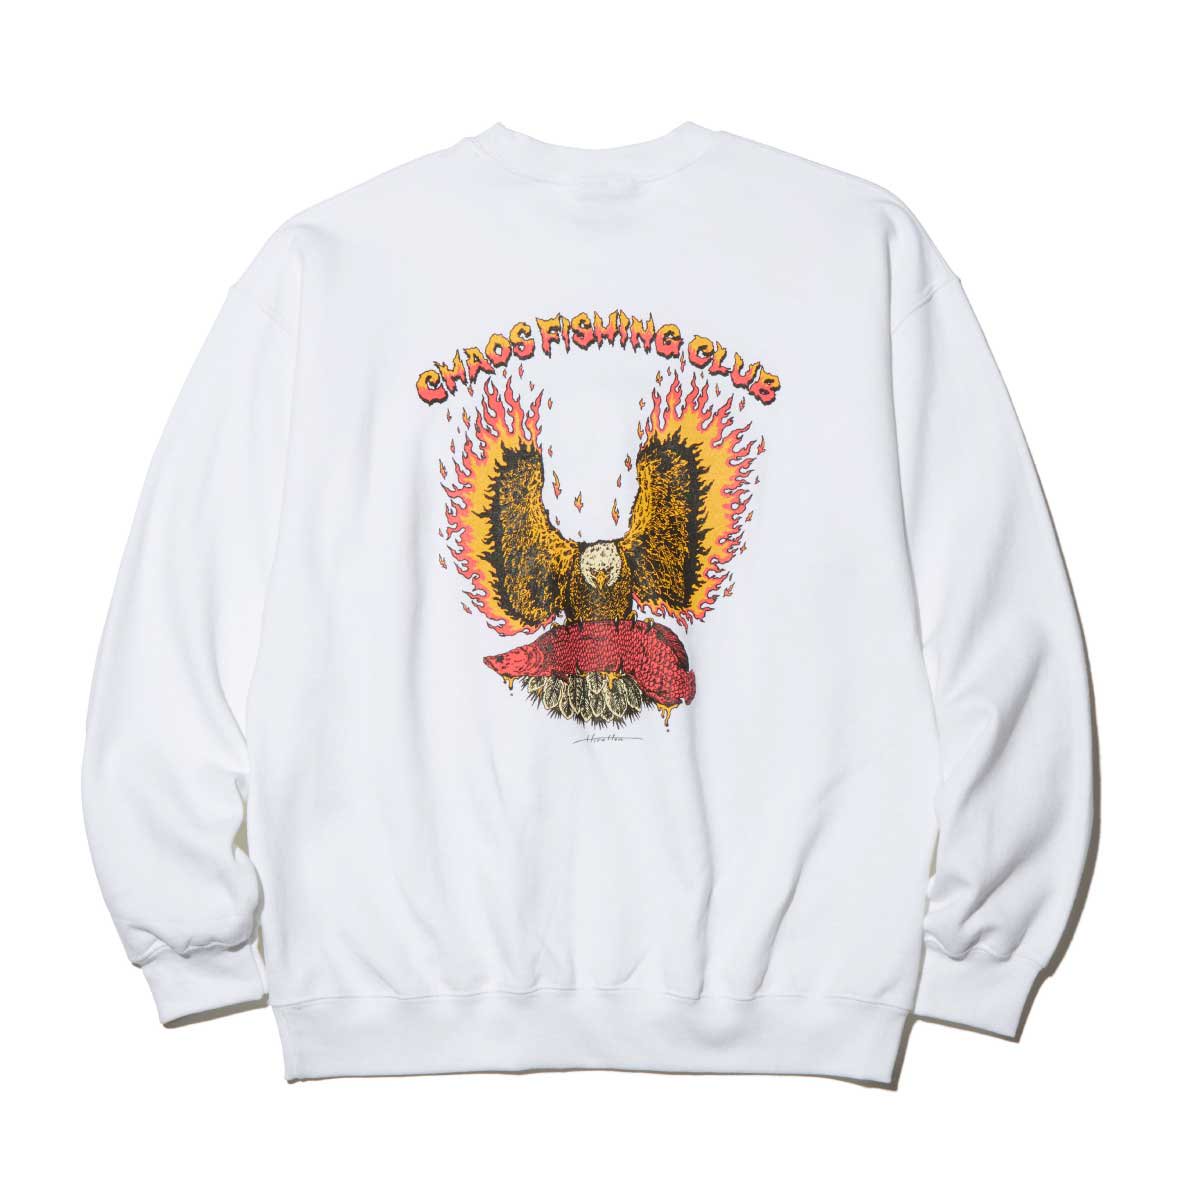 Chaos Fishing Club - EVIL FLAME CREW NECK L/S - SHRED